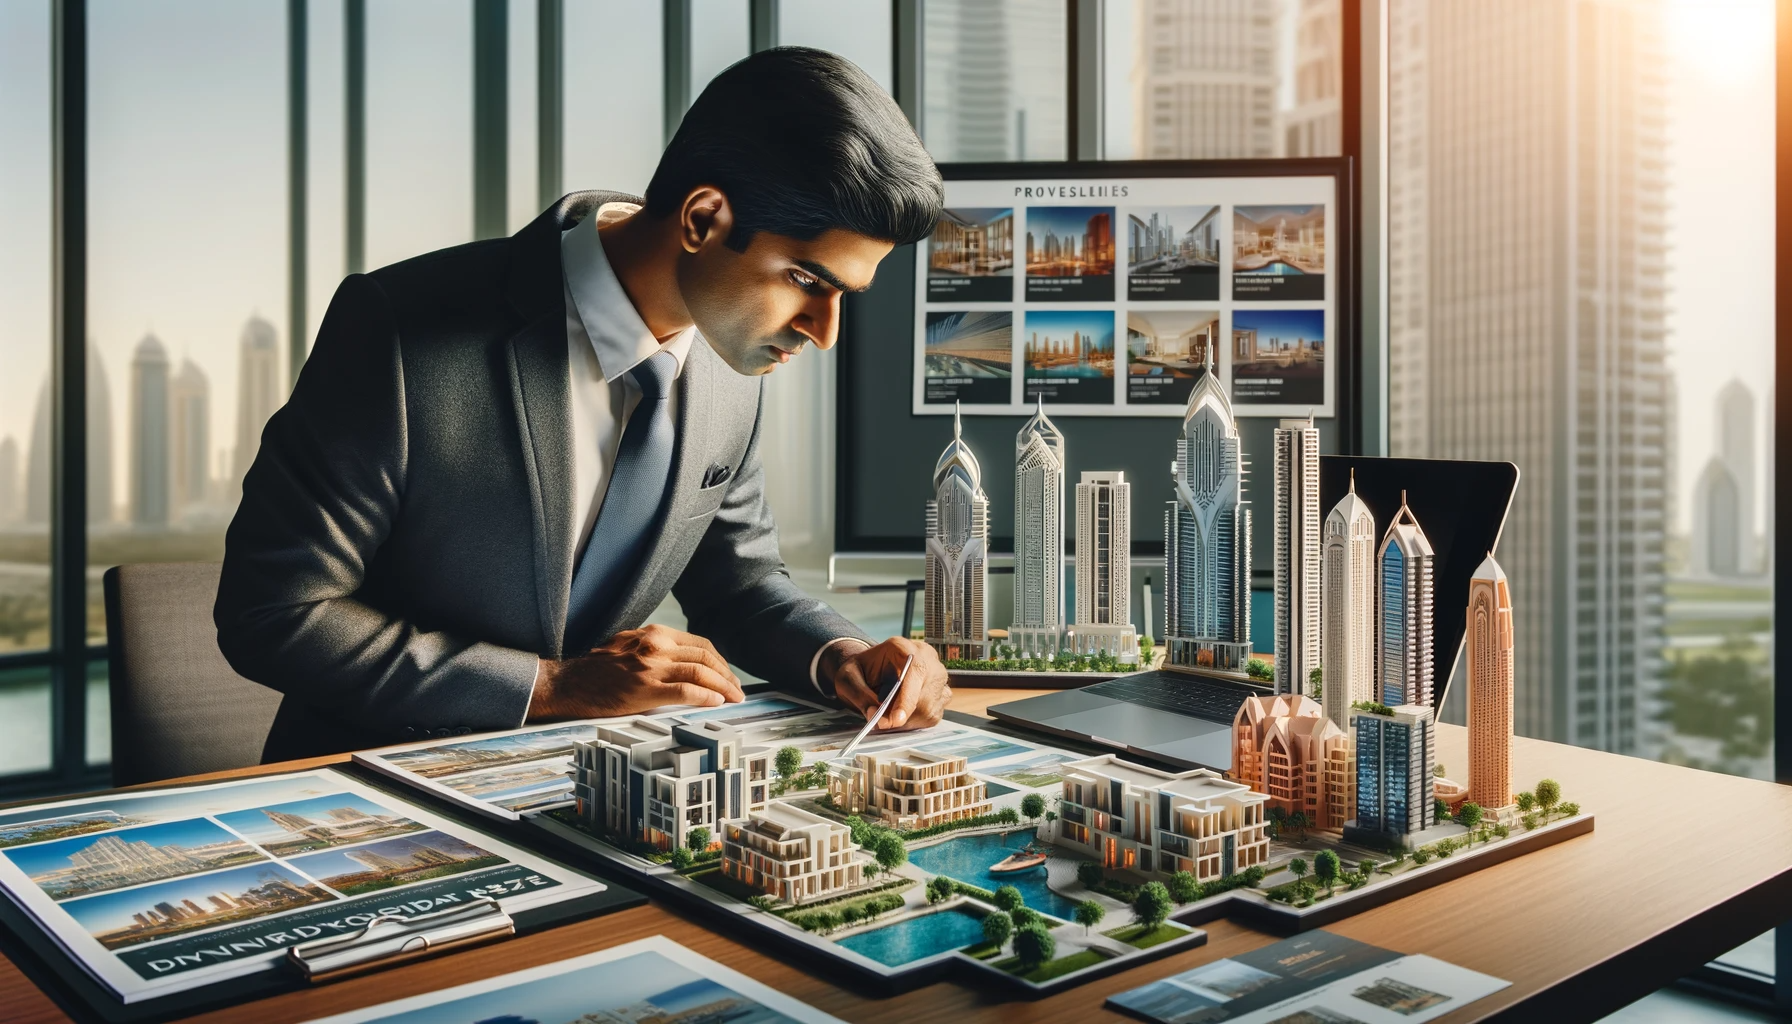 DALL·E 2024 01 13 21.44.12 An Indian investor reviewing property portfolios in Dubai. The image shows a person looking at various property listings and architectural models of D